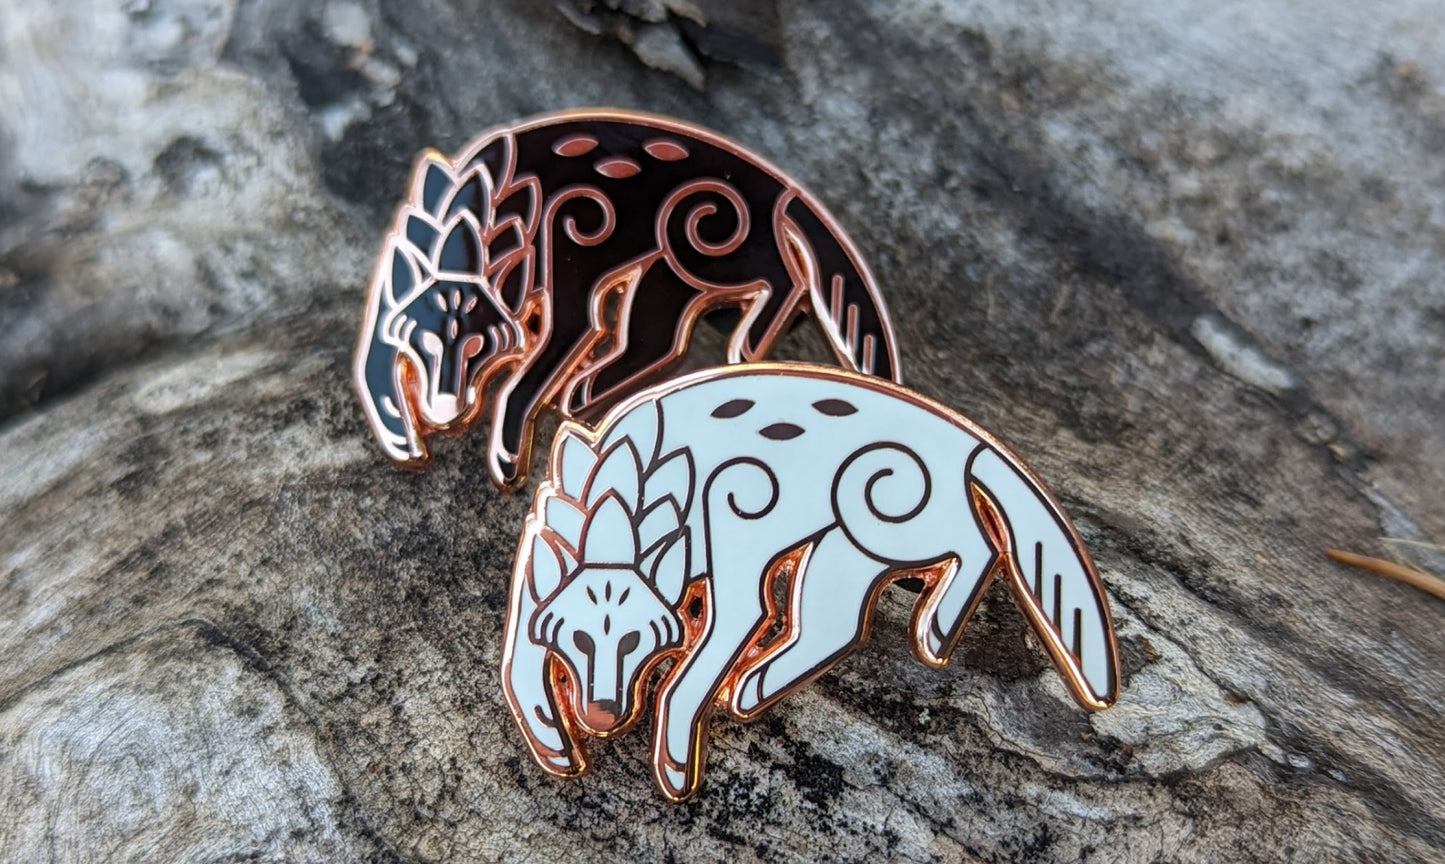 Kindred Spirits — Paired Enamel Pins